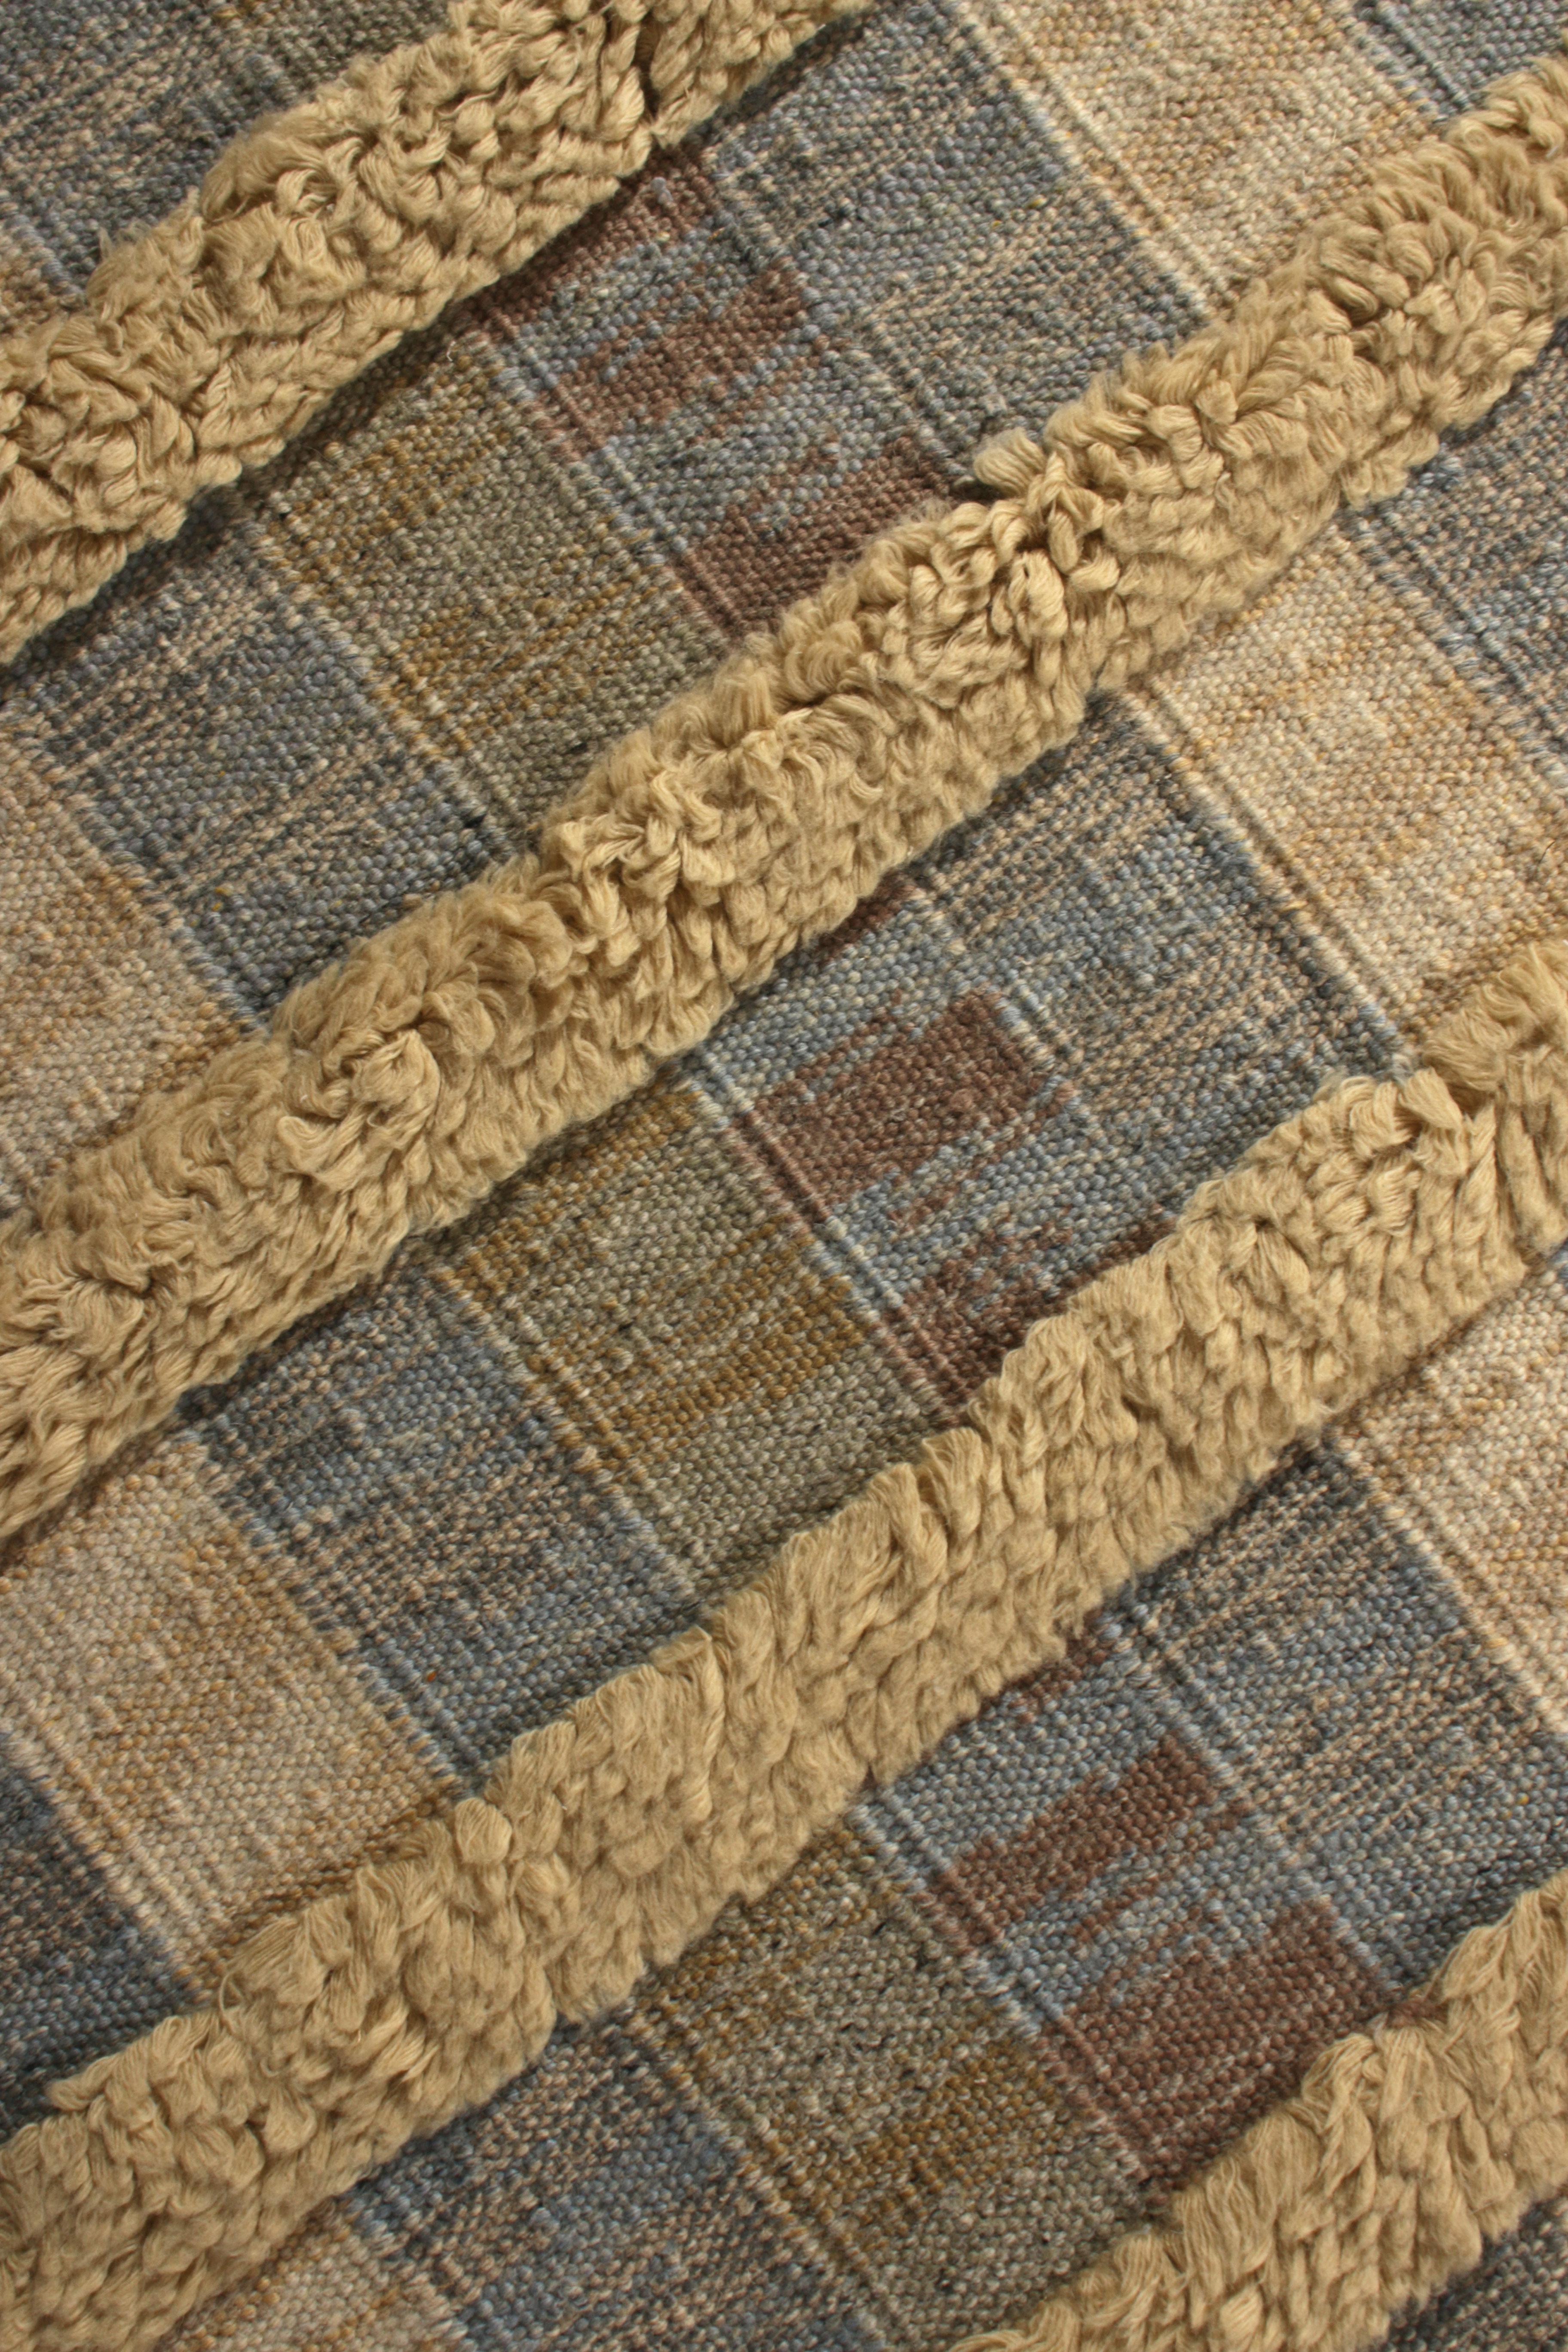 Hand-Woven Scandinavian Style Rug Striped High-Low Beige Blue Pattern by Rug & Kilim